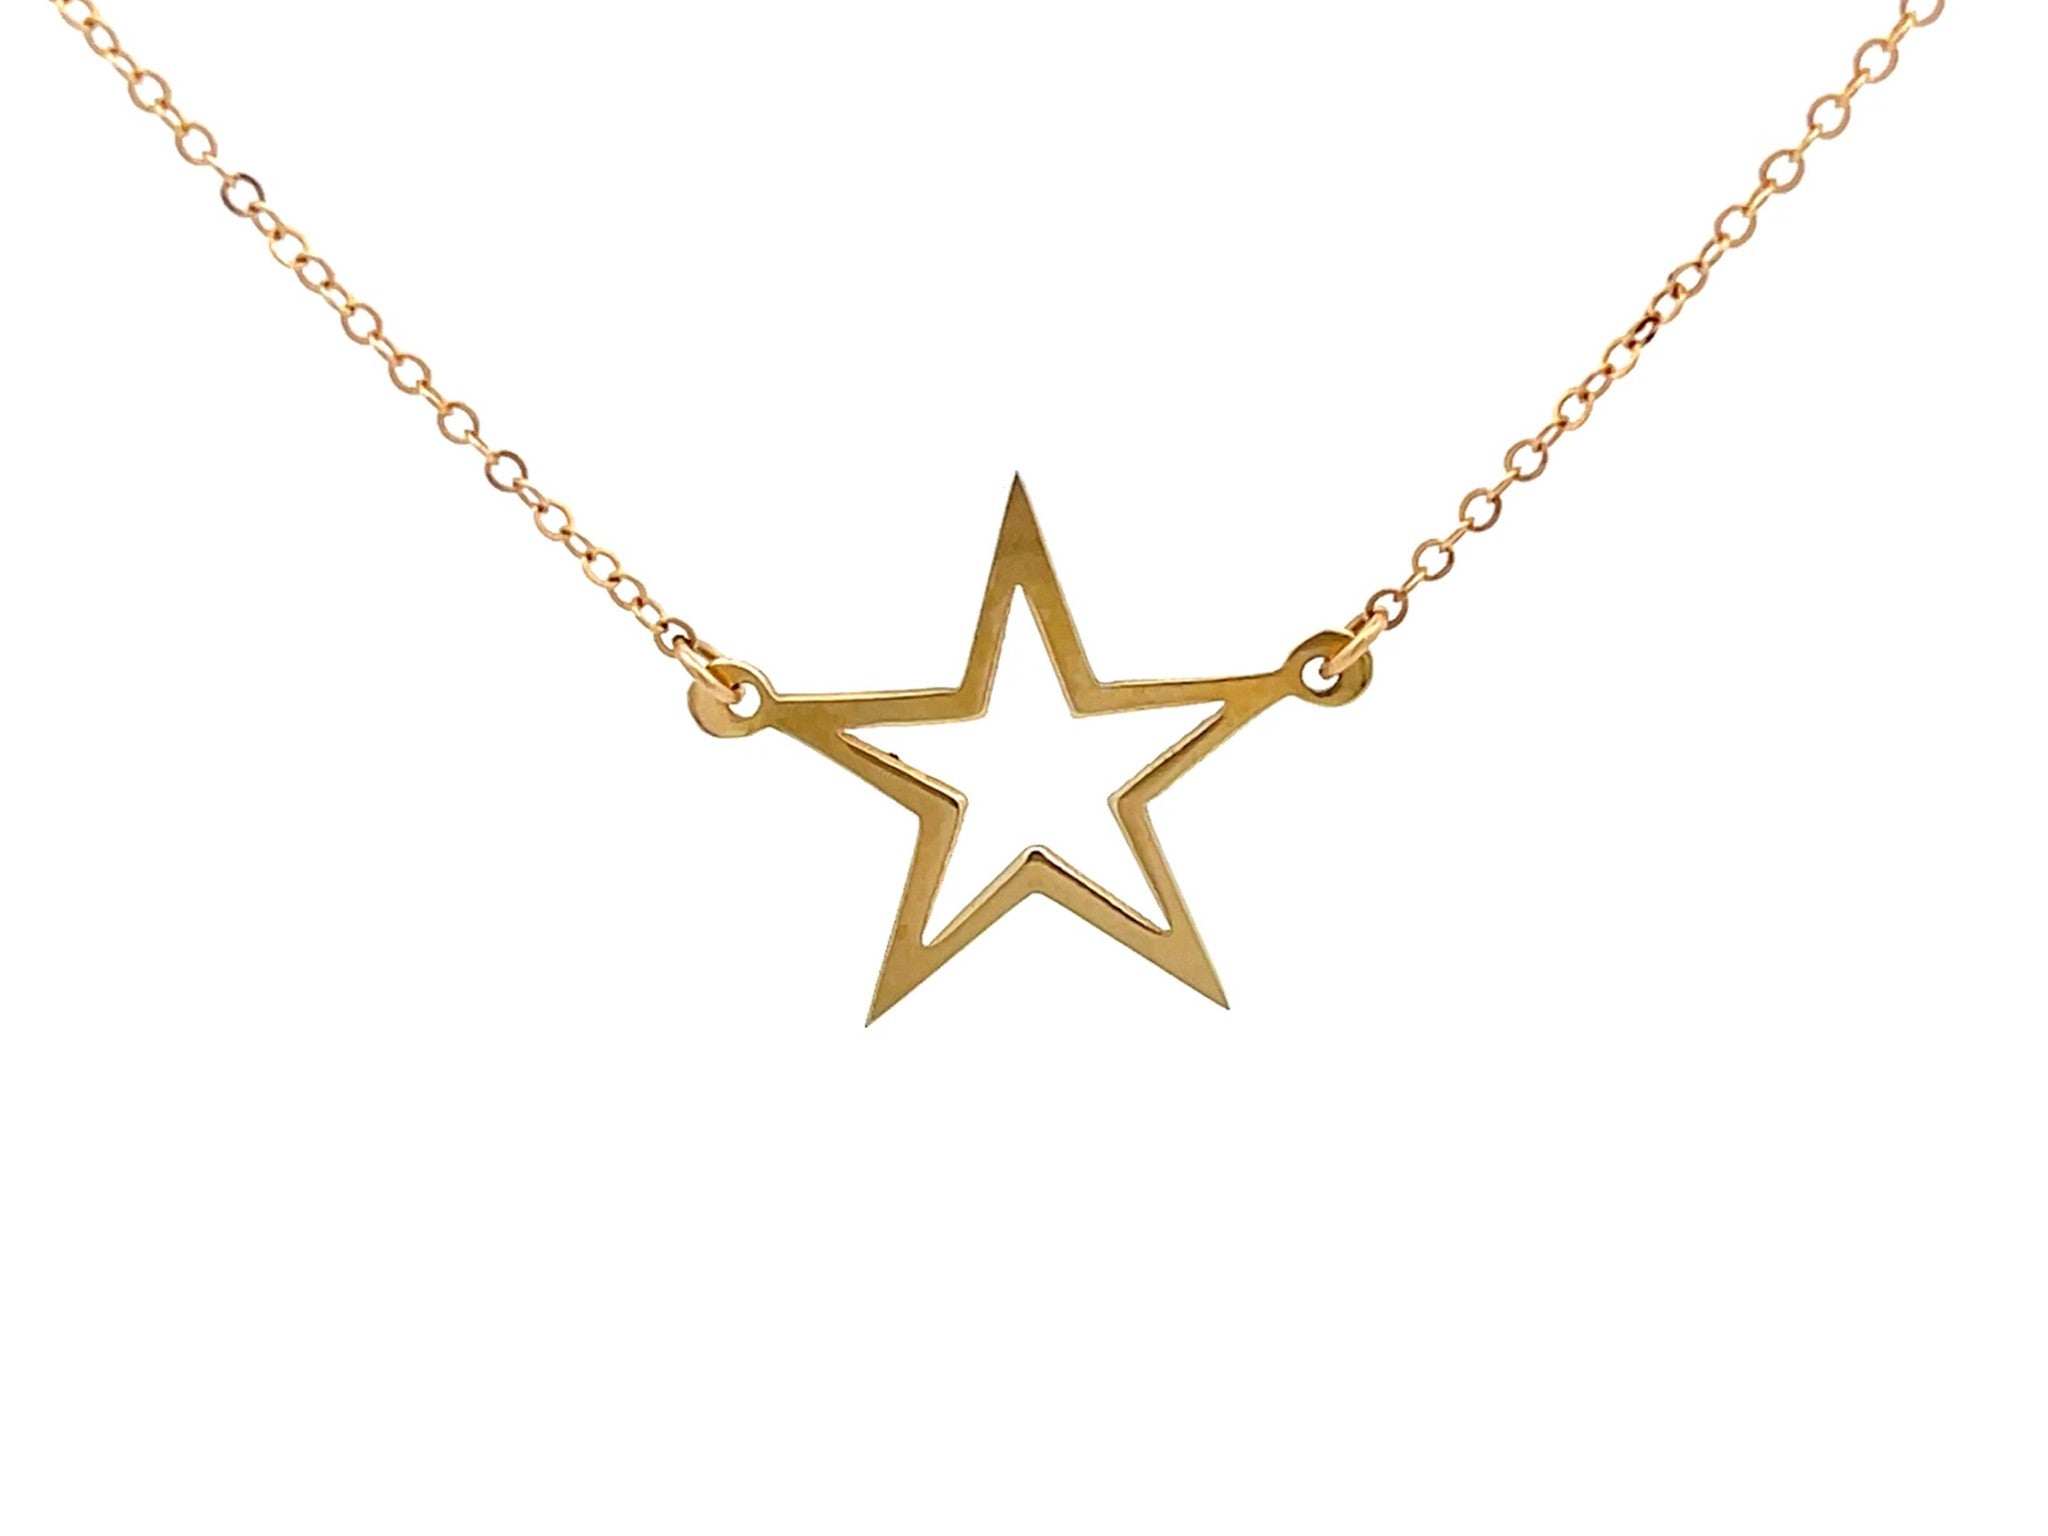 Star Necklace in 14k Yellow Gold